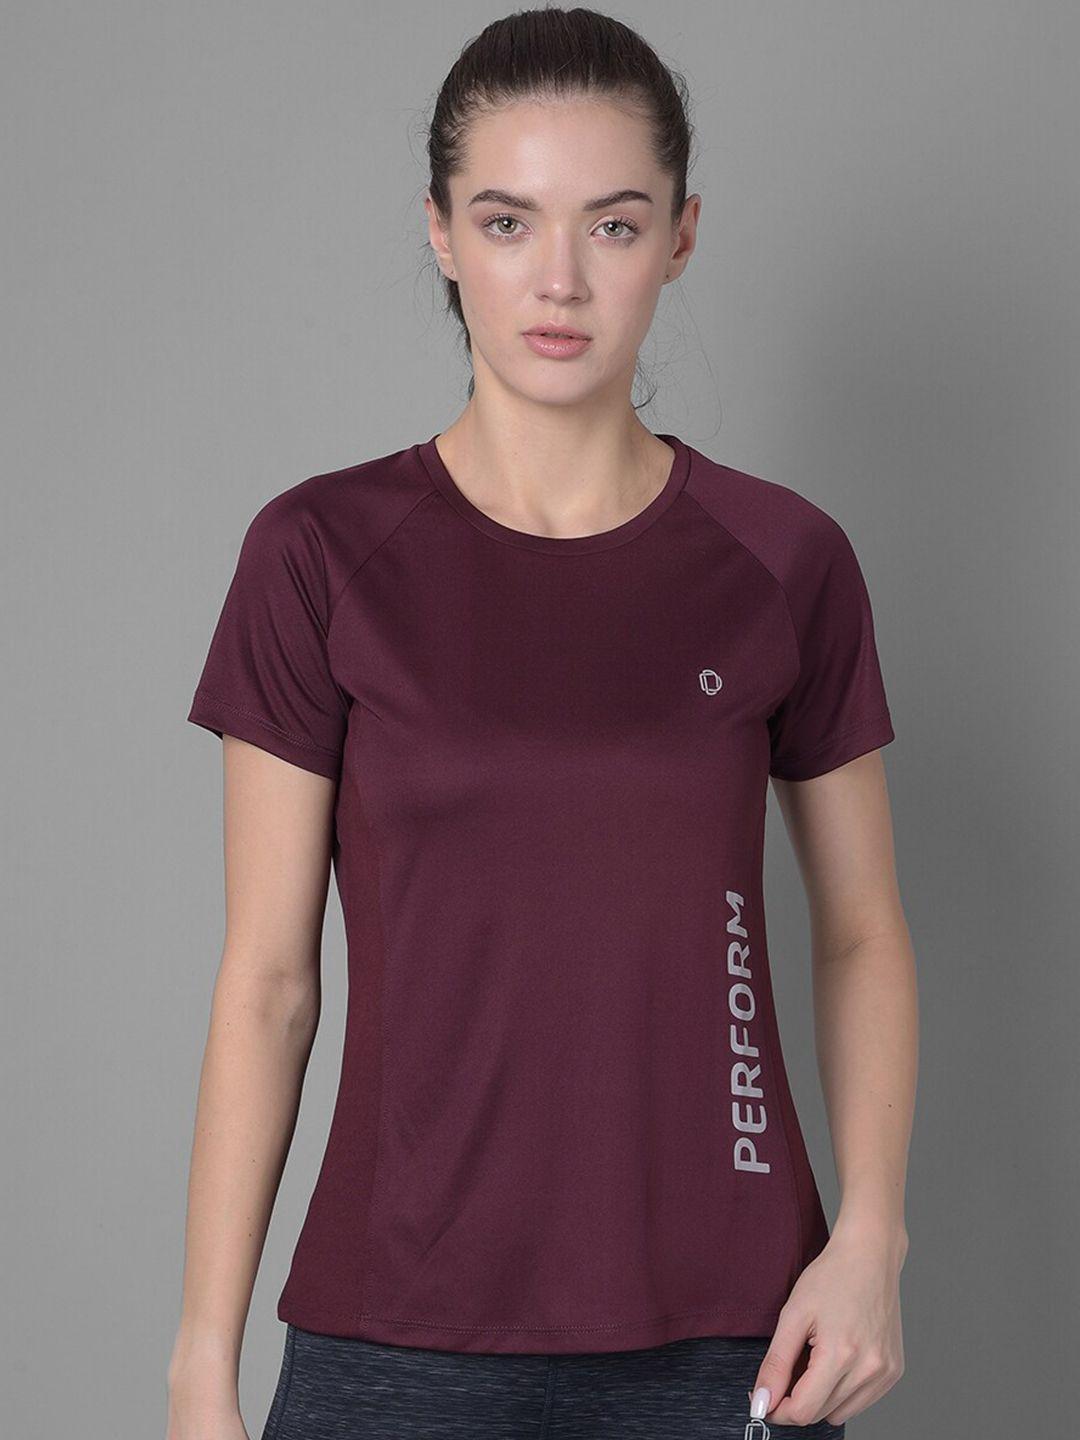 dollar round neck anti bacterial sports t-shirt